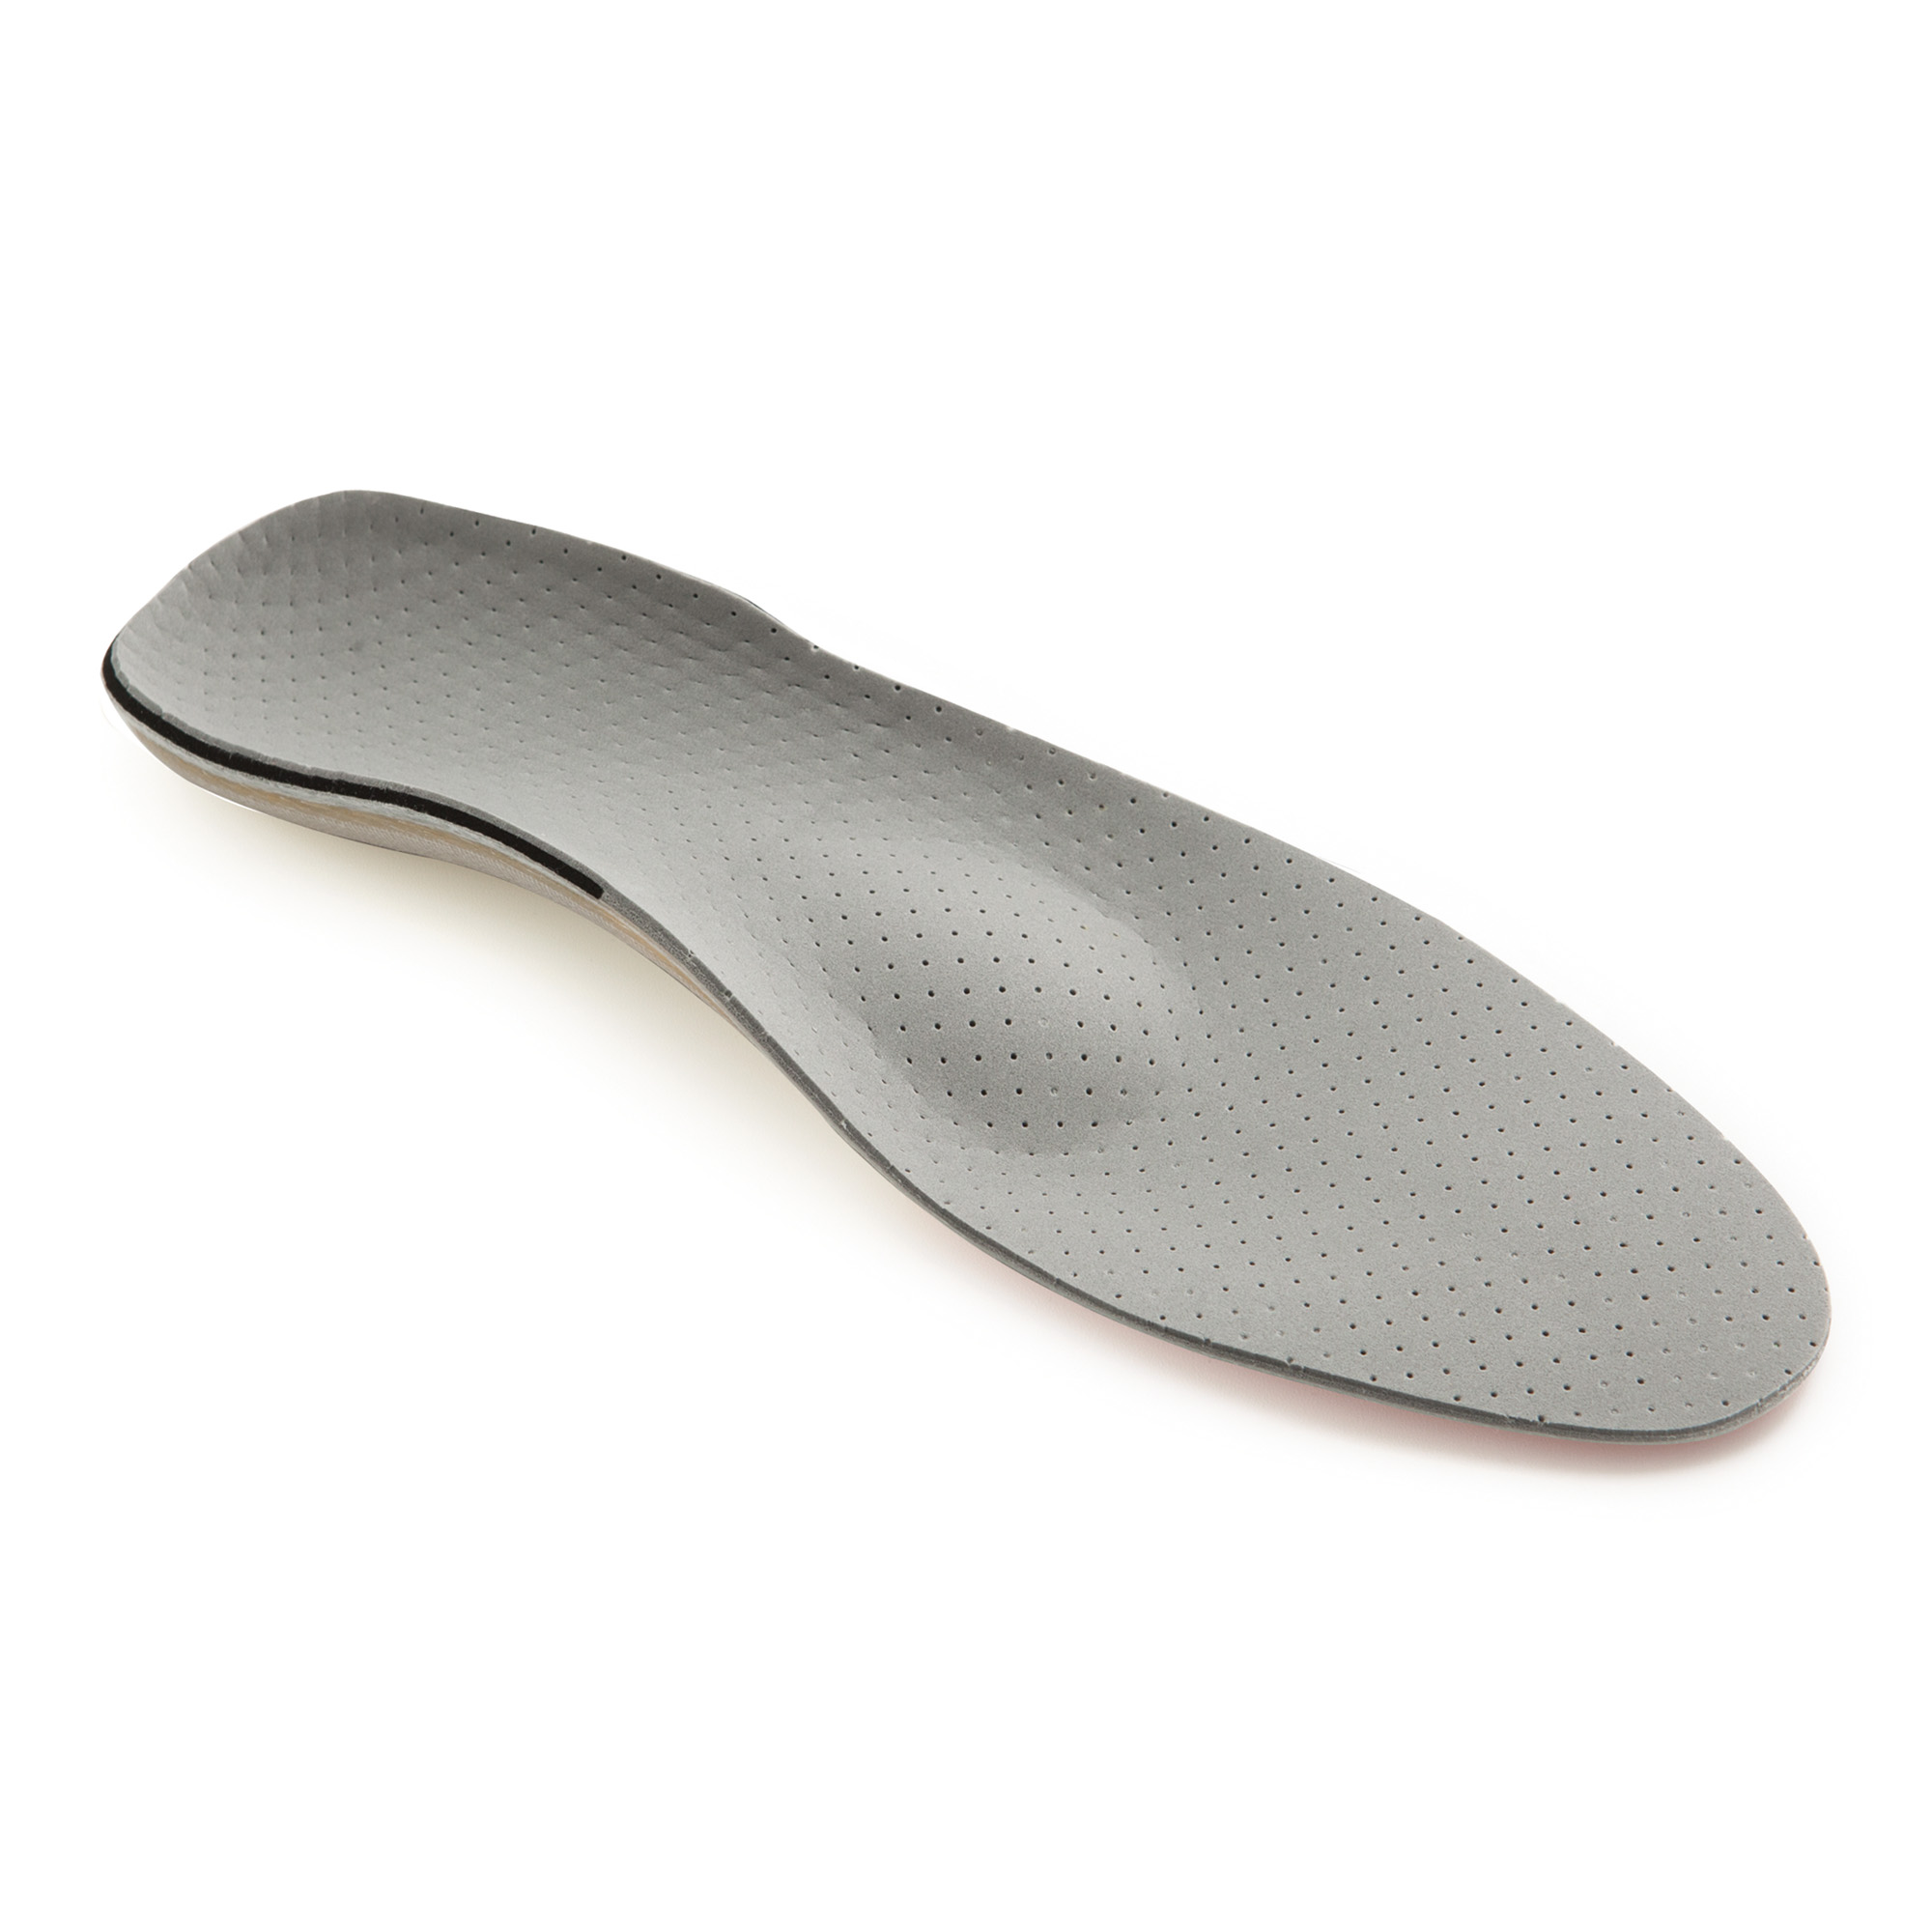 Semi-finished resin forefoot insoles in kit form